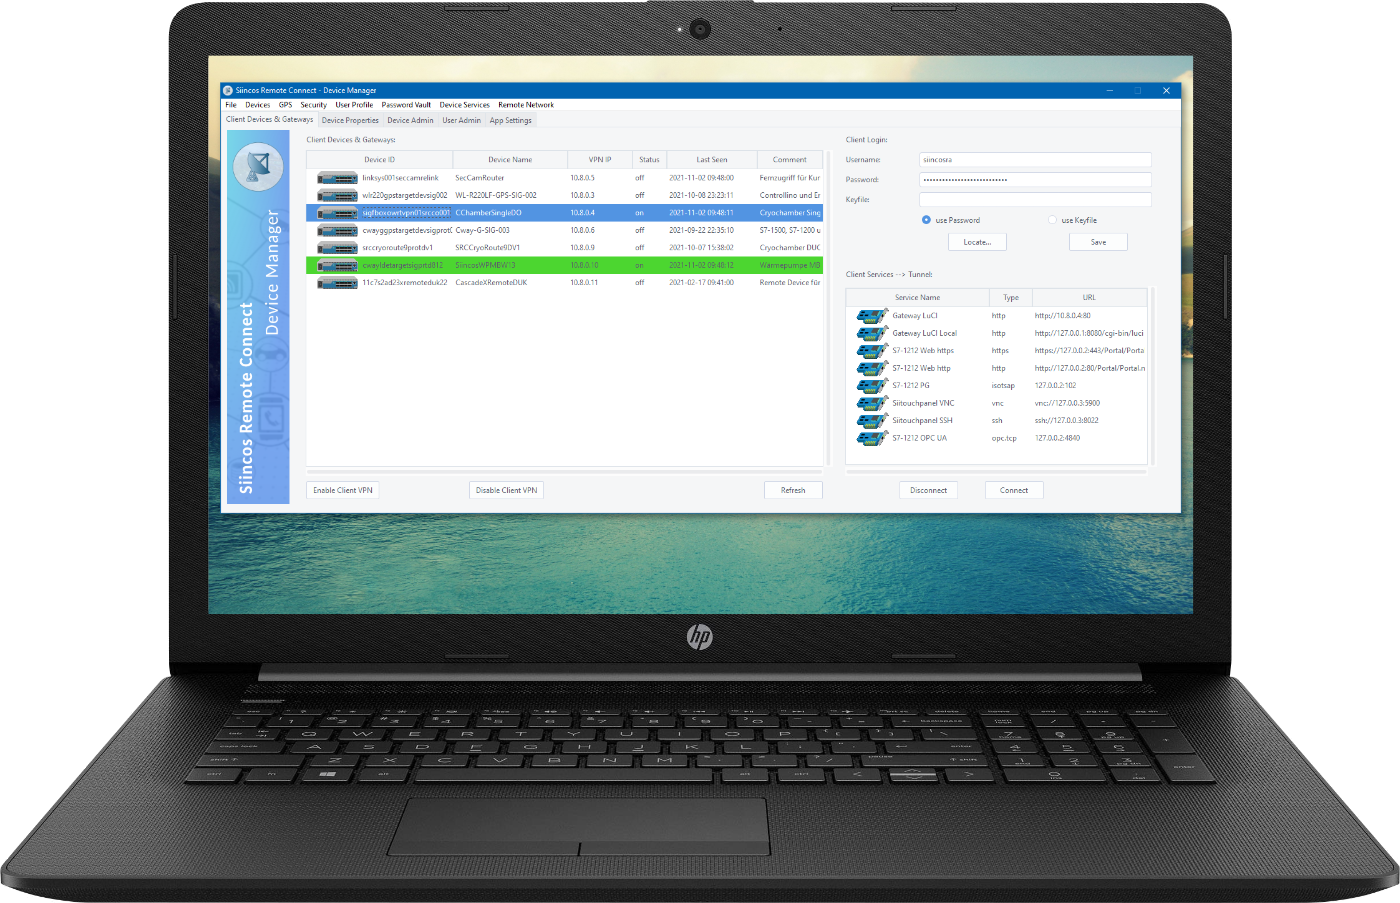 Siincos Notebook mit Siincos Device Manager App